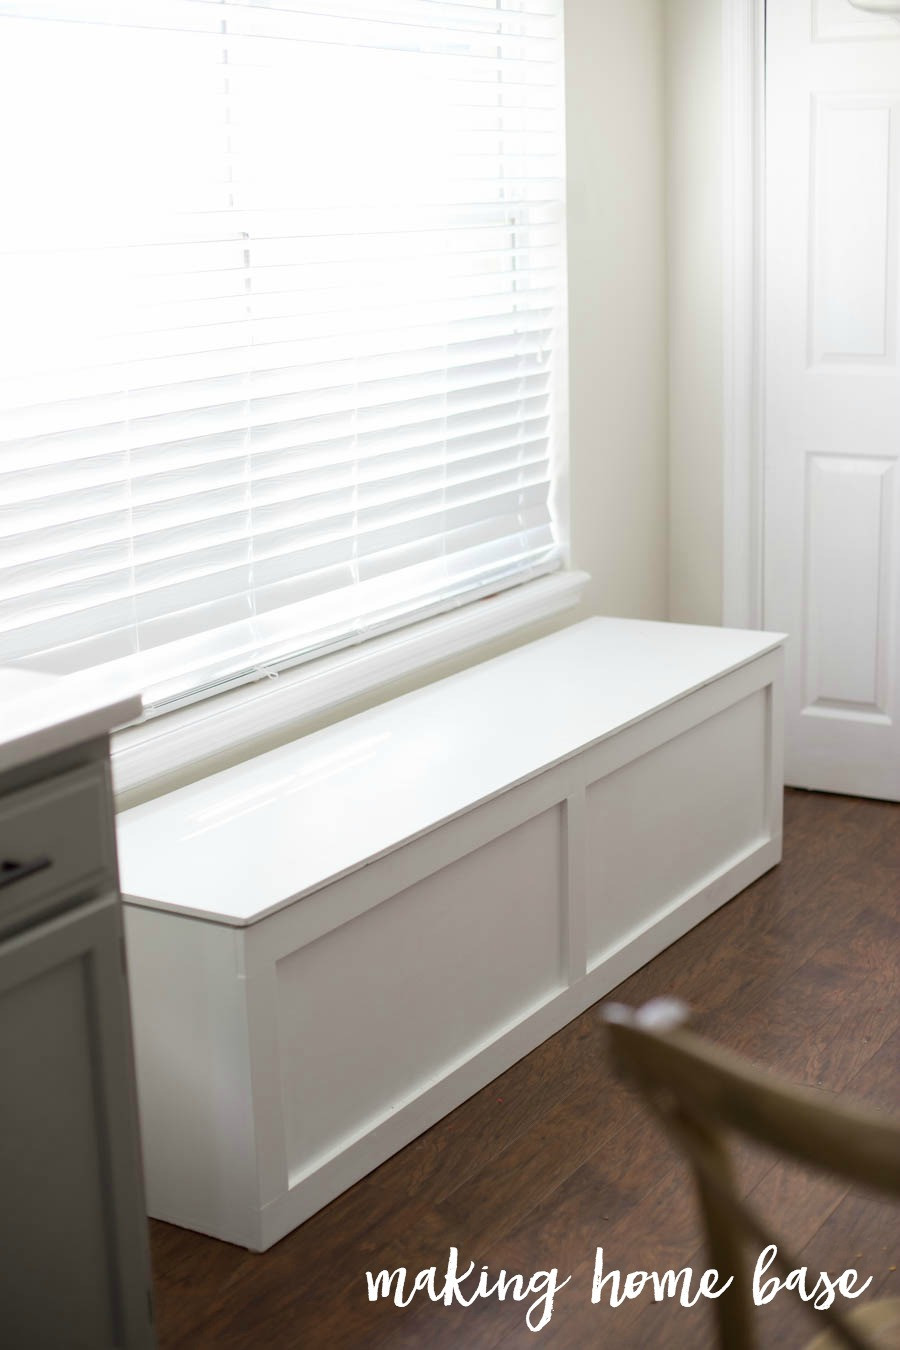 Built In Storage Bench Seat
 How to Build a Window Seat with Storage DIY Tutorial